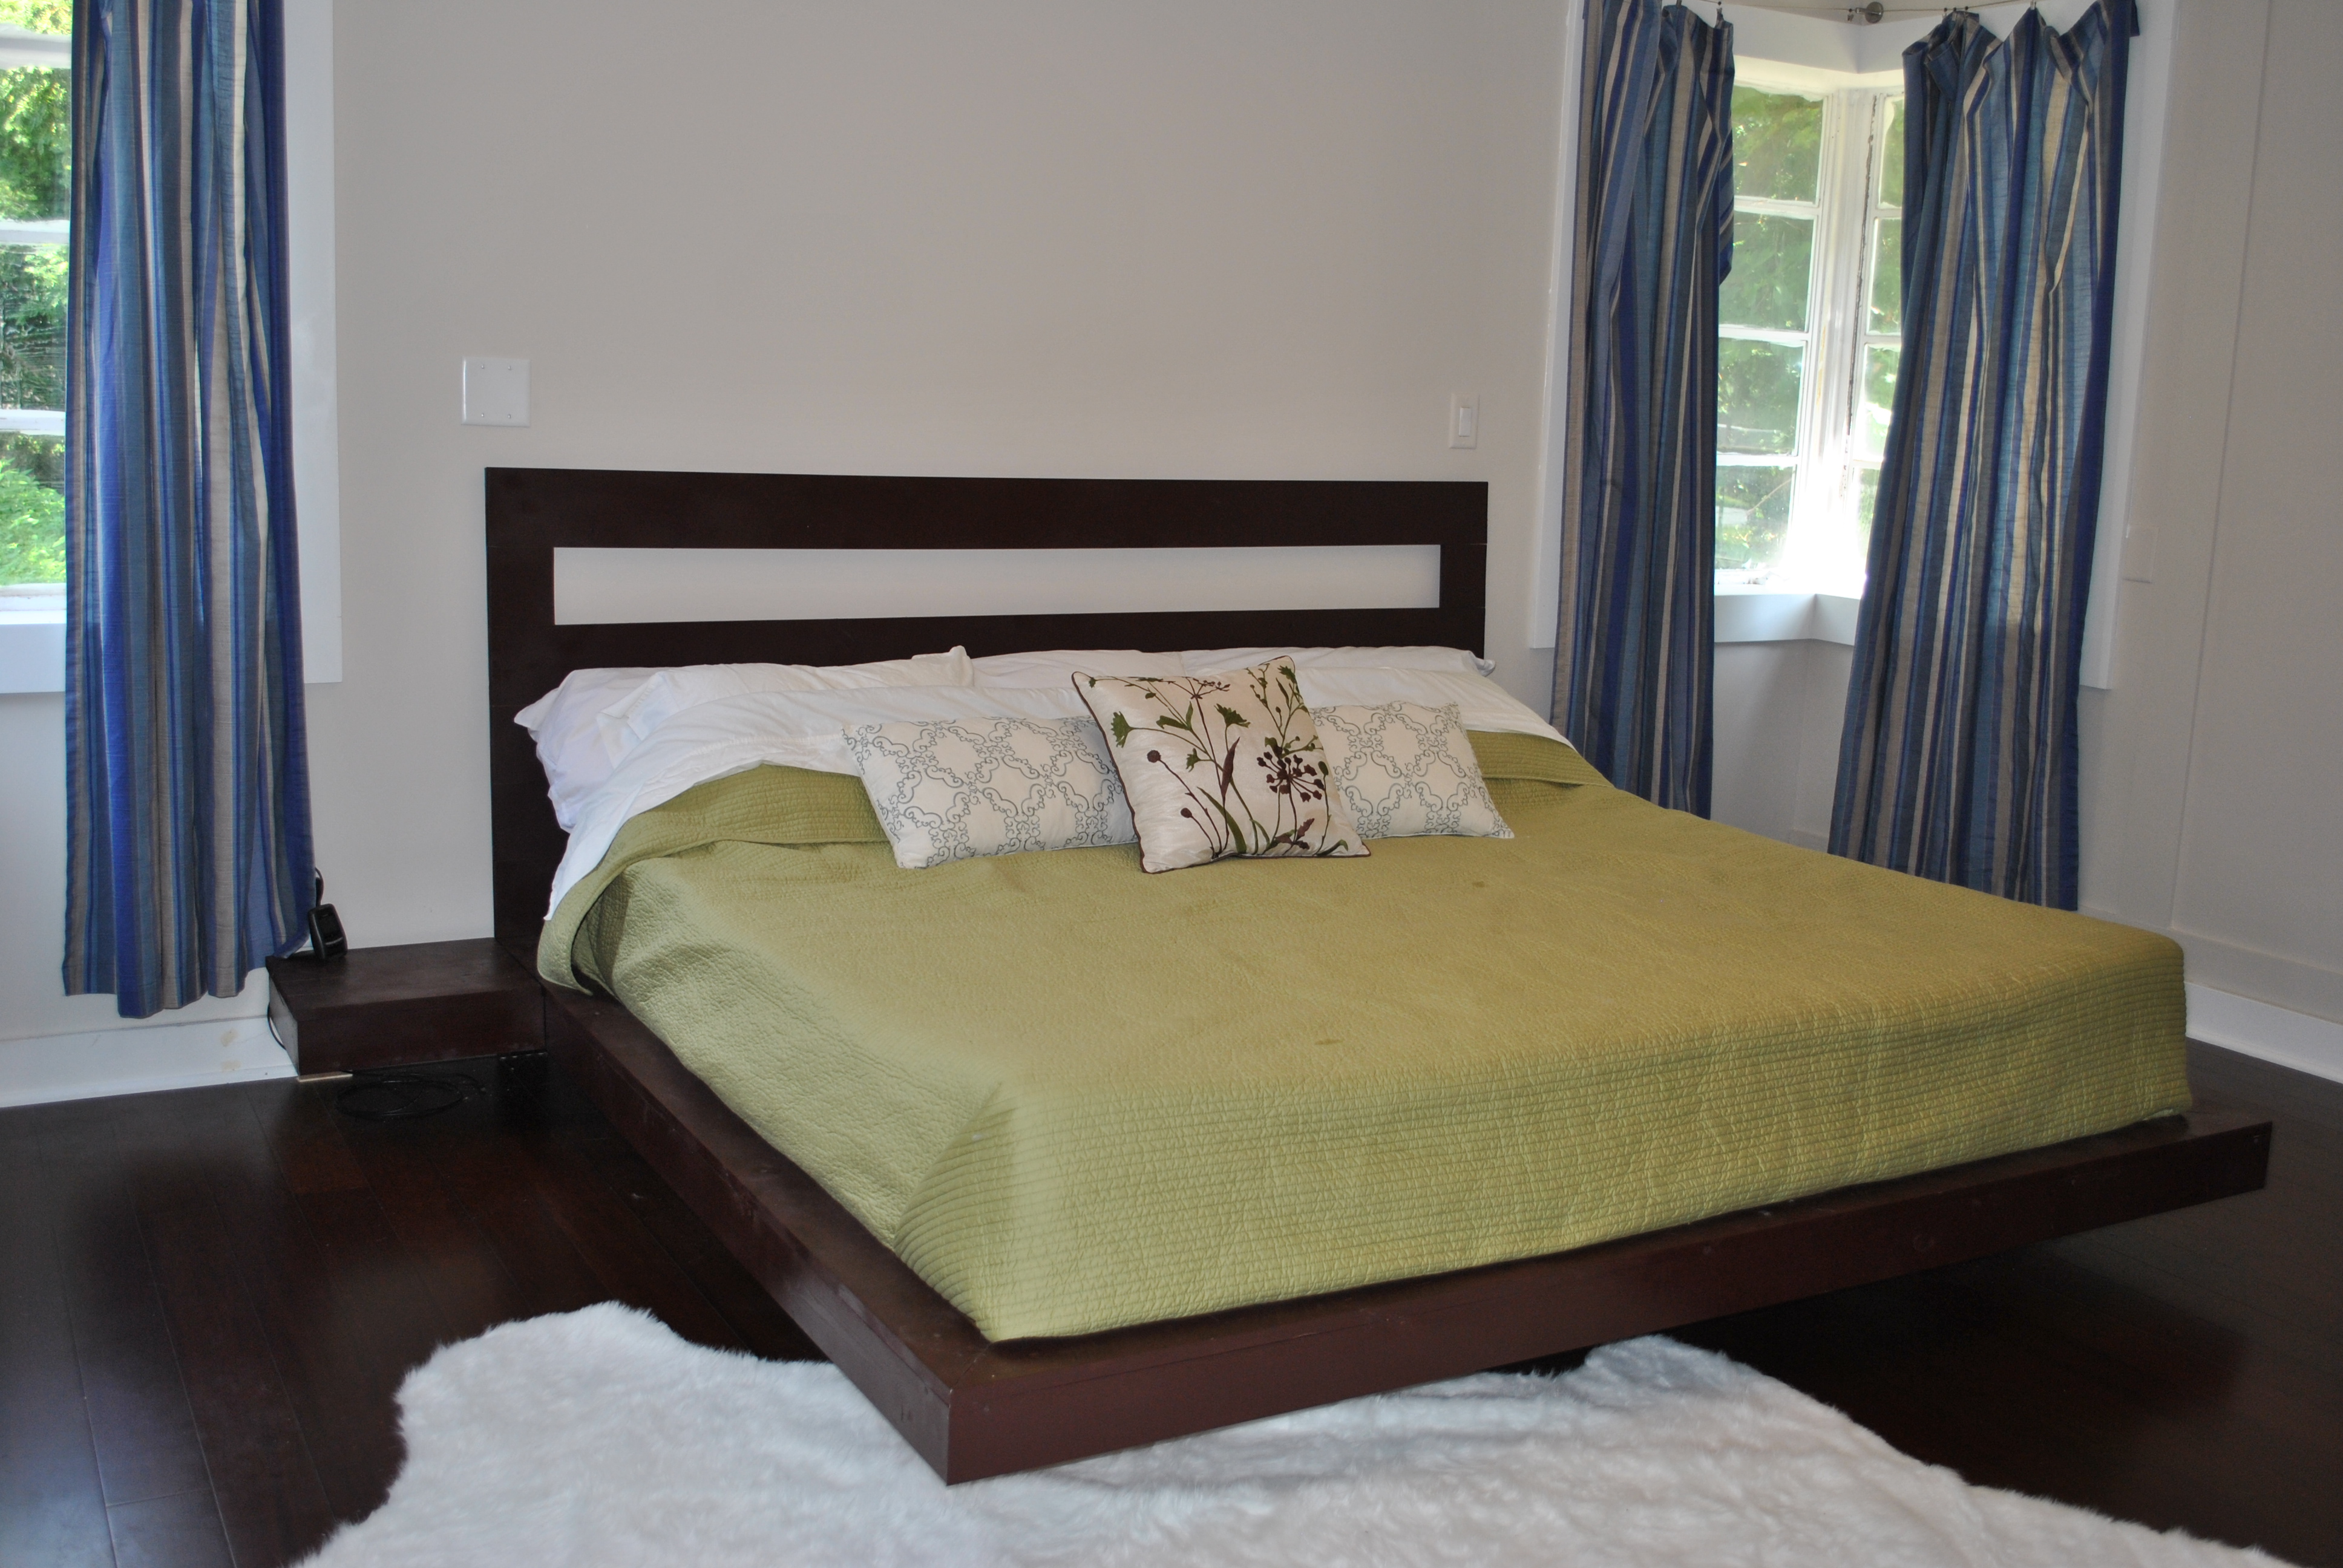 floating $25 cut twin and  king diy headboard Simple   out 25 side headboard and tables (or  platform floating